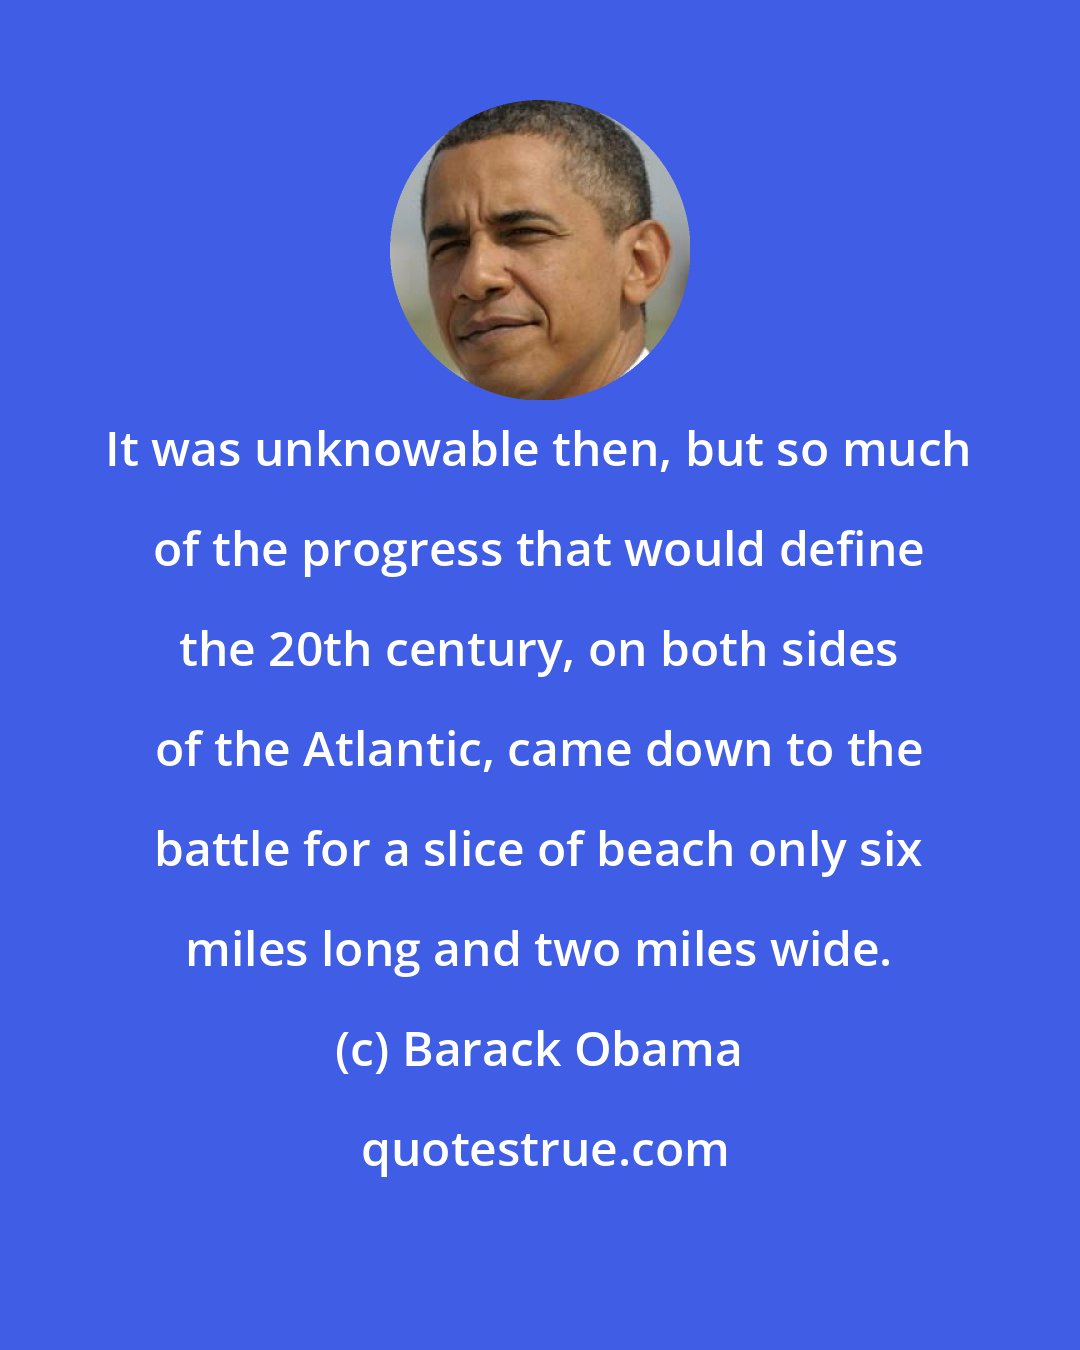 Barack Obama: It was unknowable then, but so much of the progress that would define the 20th century, on both sides of the Atlantic, came down to the battle for a slice of beach only six miles long and two miles wide.